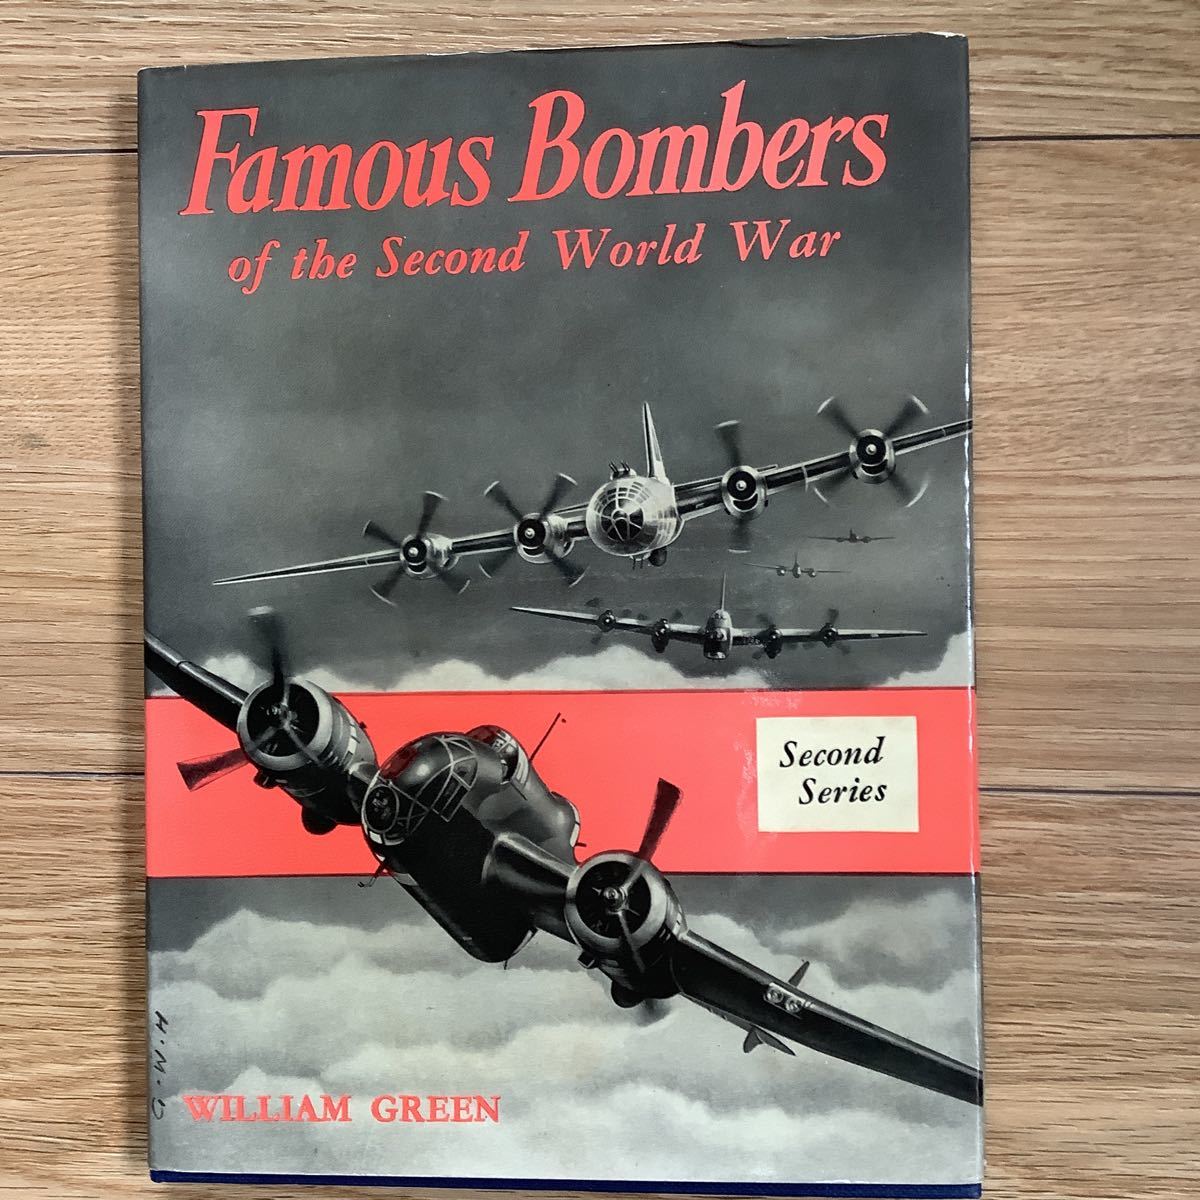 《S》洋書 第二次大戦の有名な爆撃機 Famous Bombers of the Second World Warの画像1